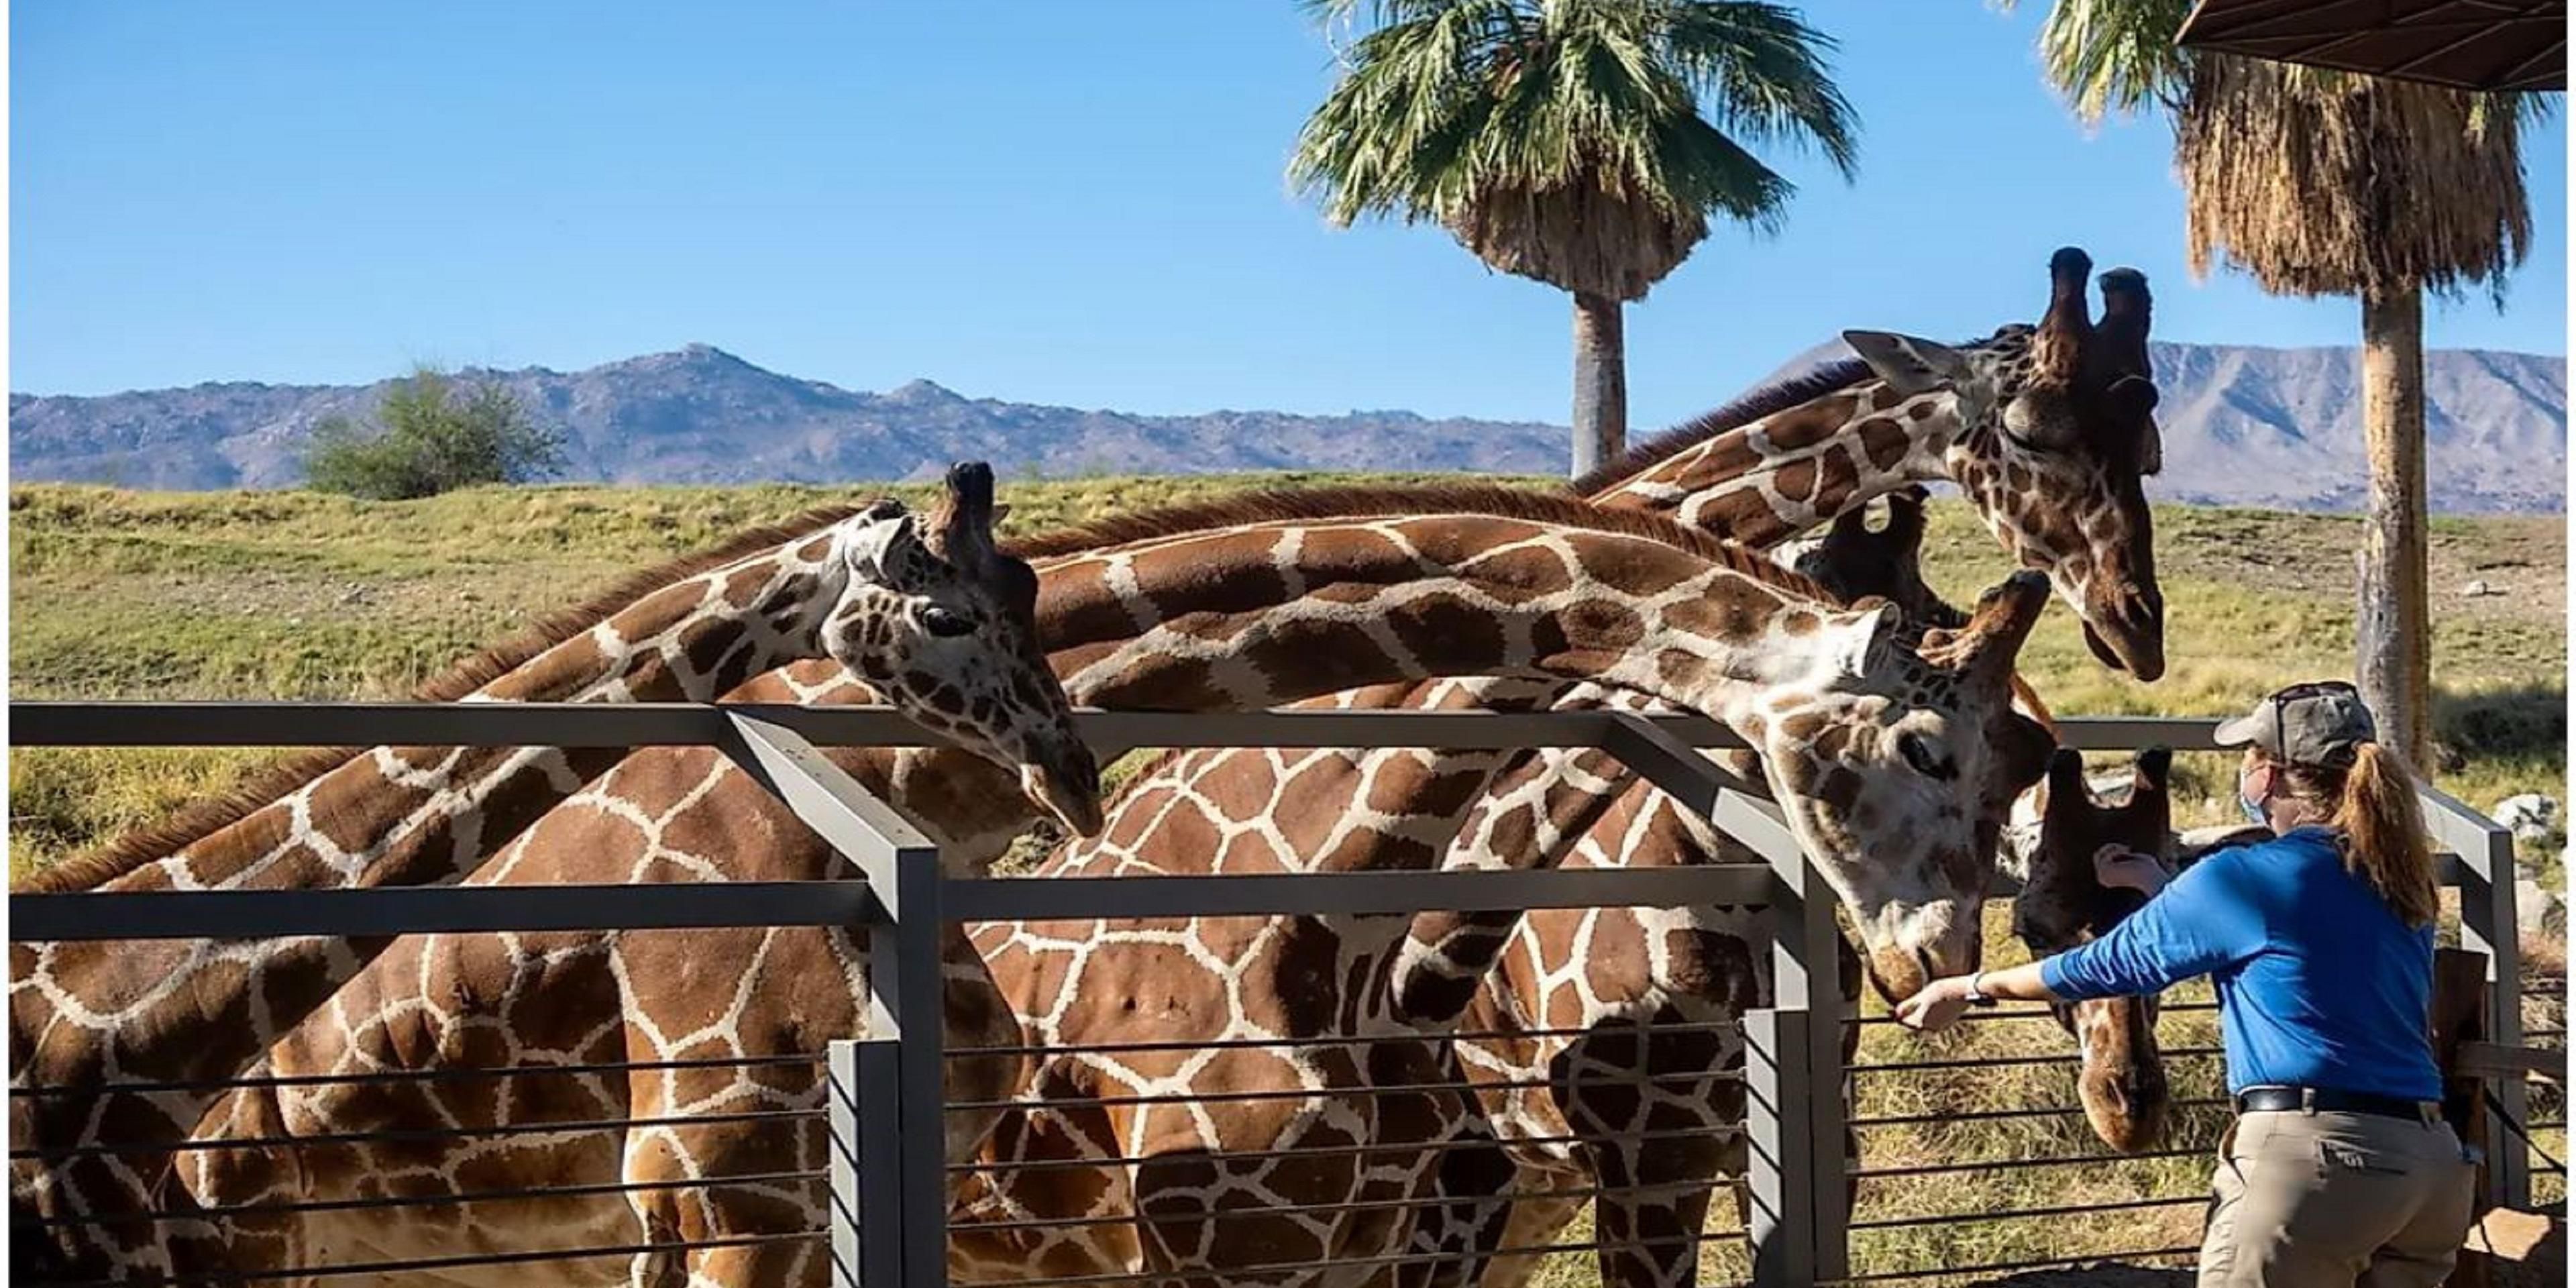 While visiting Palm Desert, take the family to one of the ten best Zoos in the US by Conde Nast Traveler. The Living Desert Zoo & Gardens specializes in the deserts of the world.